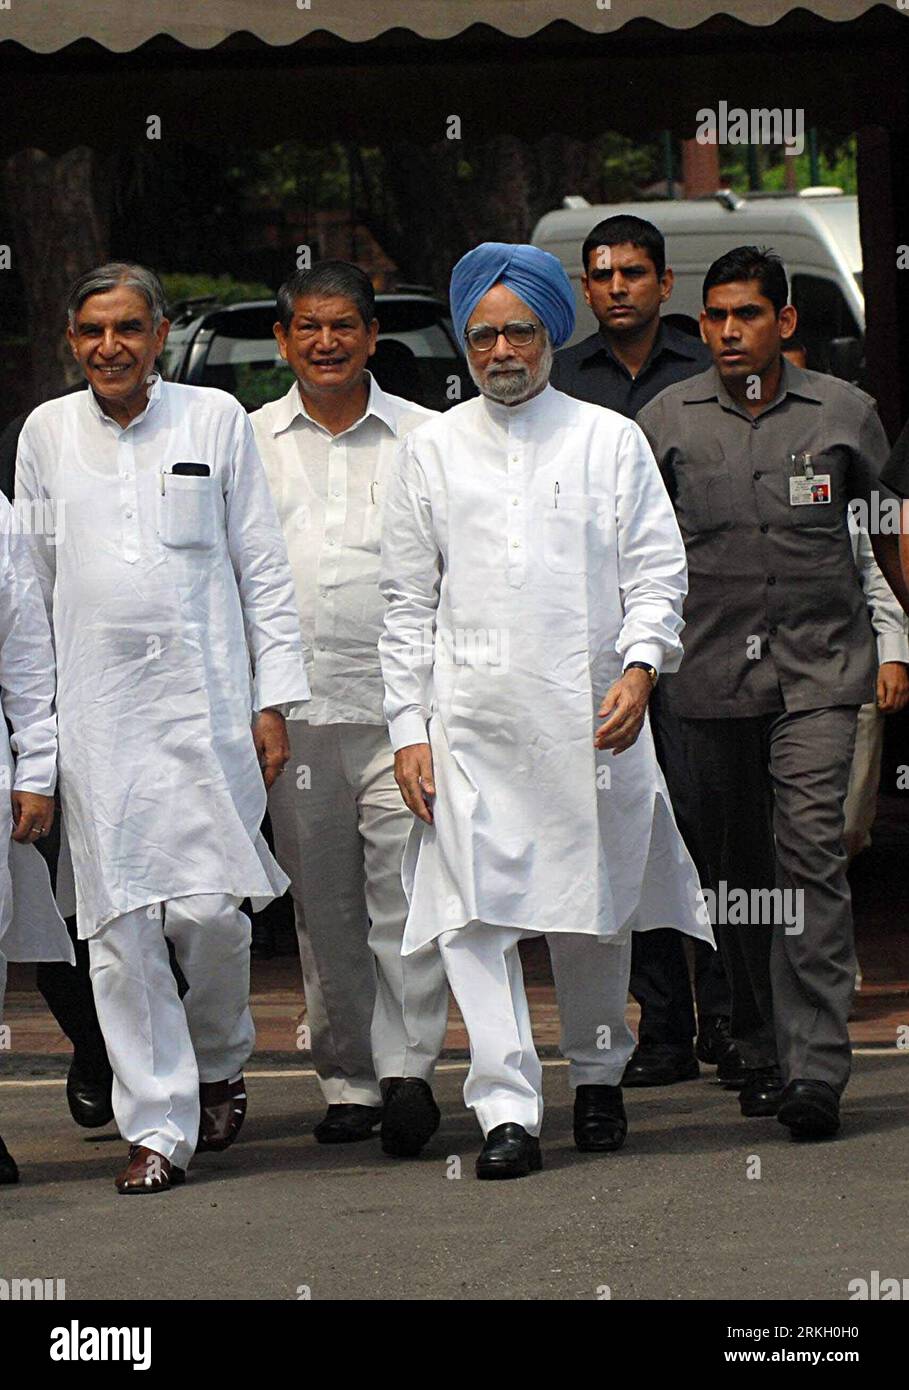 Bildnummer: 55672411  Datum: 01.08.2011  Copyright: imago/Xinhua (110801) -- NEW DELHI, Aug. 1, 2011 (Xinhua) -- Indian Prime Minister Manmohan Singh (2nd R front) with other ministers arrive at the first day of monsoon session of Parliament, in New Delhi, India, Aug. 1, 2011. Manmohan Singh Monday appealed to opposition parties to come together and tackle problems facing the country. (Xinhua/Partha Sarkar)(axy) INDIA-NEW DELHI-MANMOHAN SINGH PUBLICATIONxNOTxINxCHN People Politik xdp x0x premiumd 2011 hoch     Bildnummer 55672411 Date 01 08 2011 Copyright Imago XINHUA  New Delhi Aug 1 2011 XIN Stock Photo